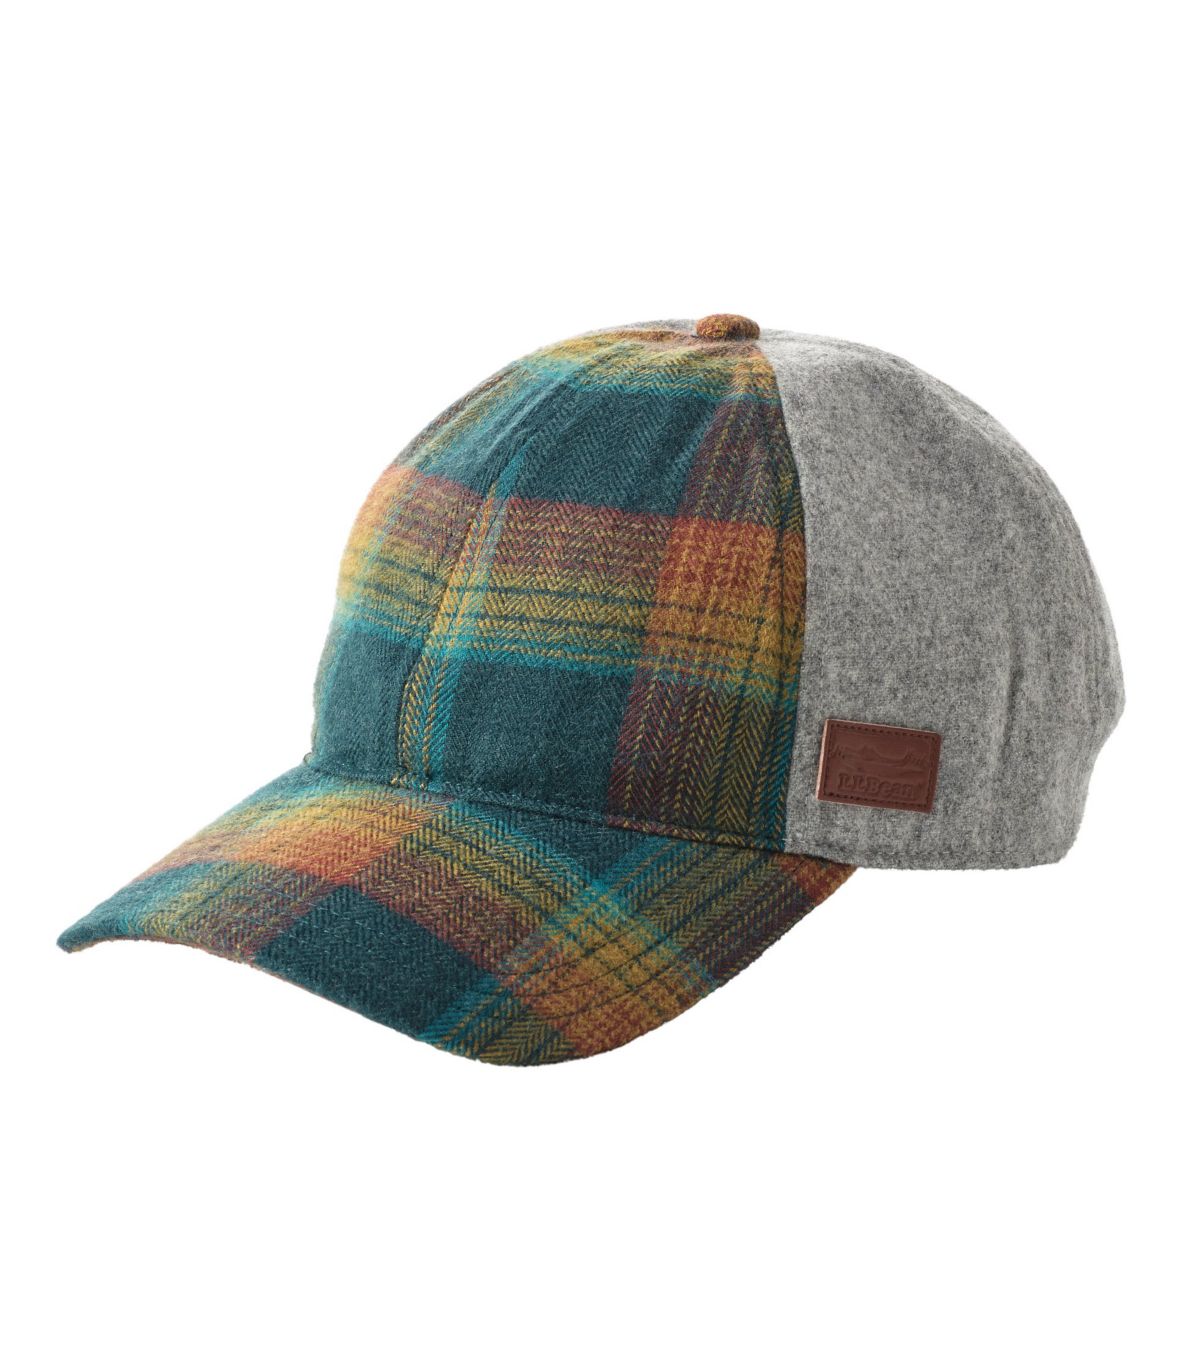 Adults' Overland Wool Cap